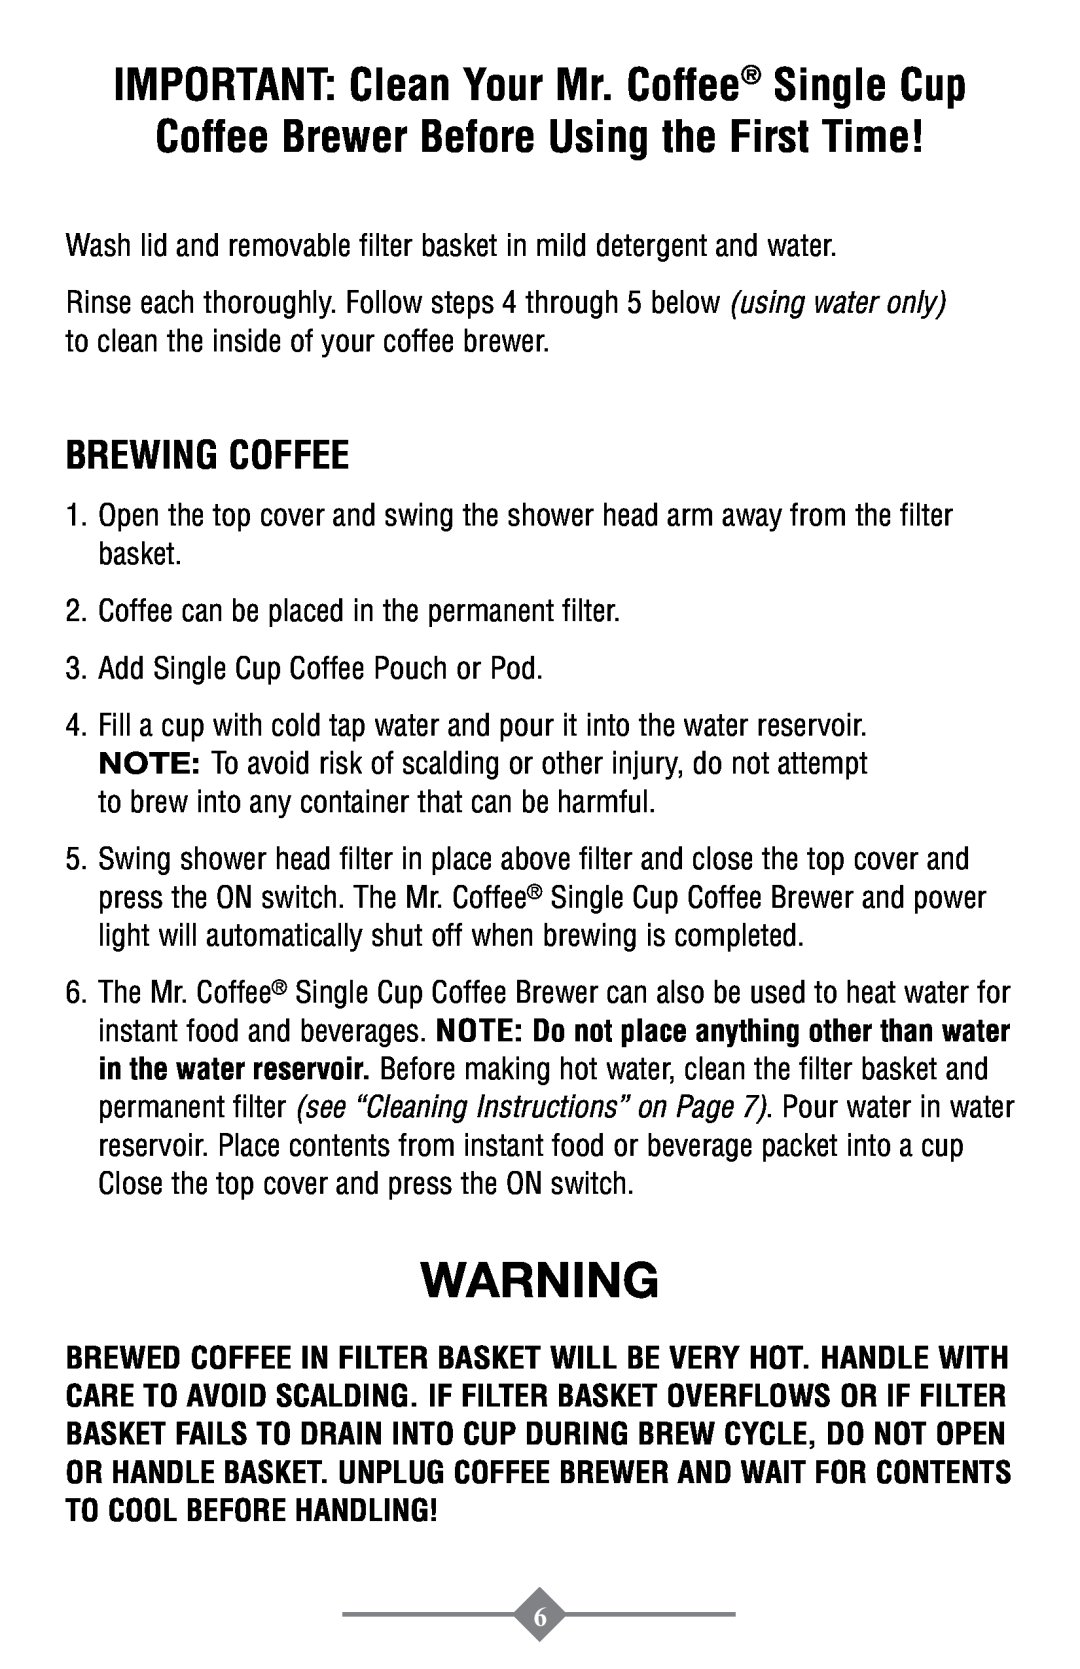 Mr. Coffee PTC13-100 instruction manual Brewing Coffee, Wash lid and removable filter basket in mild detergent and water 